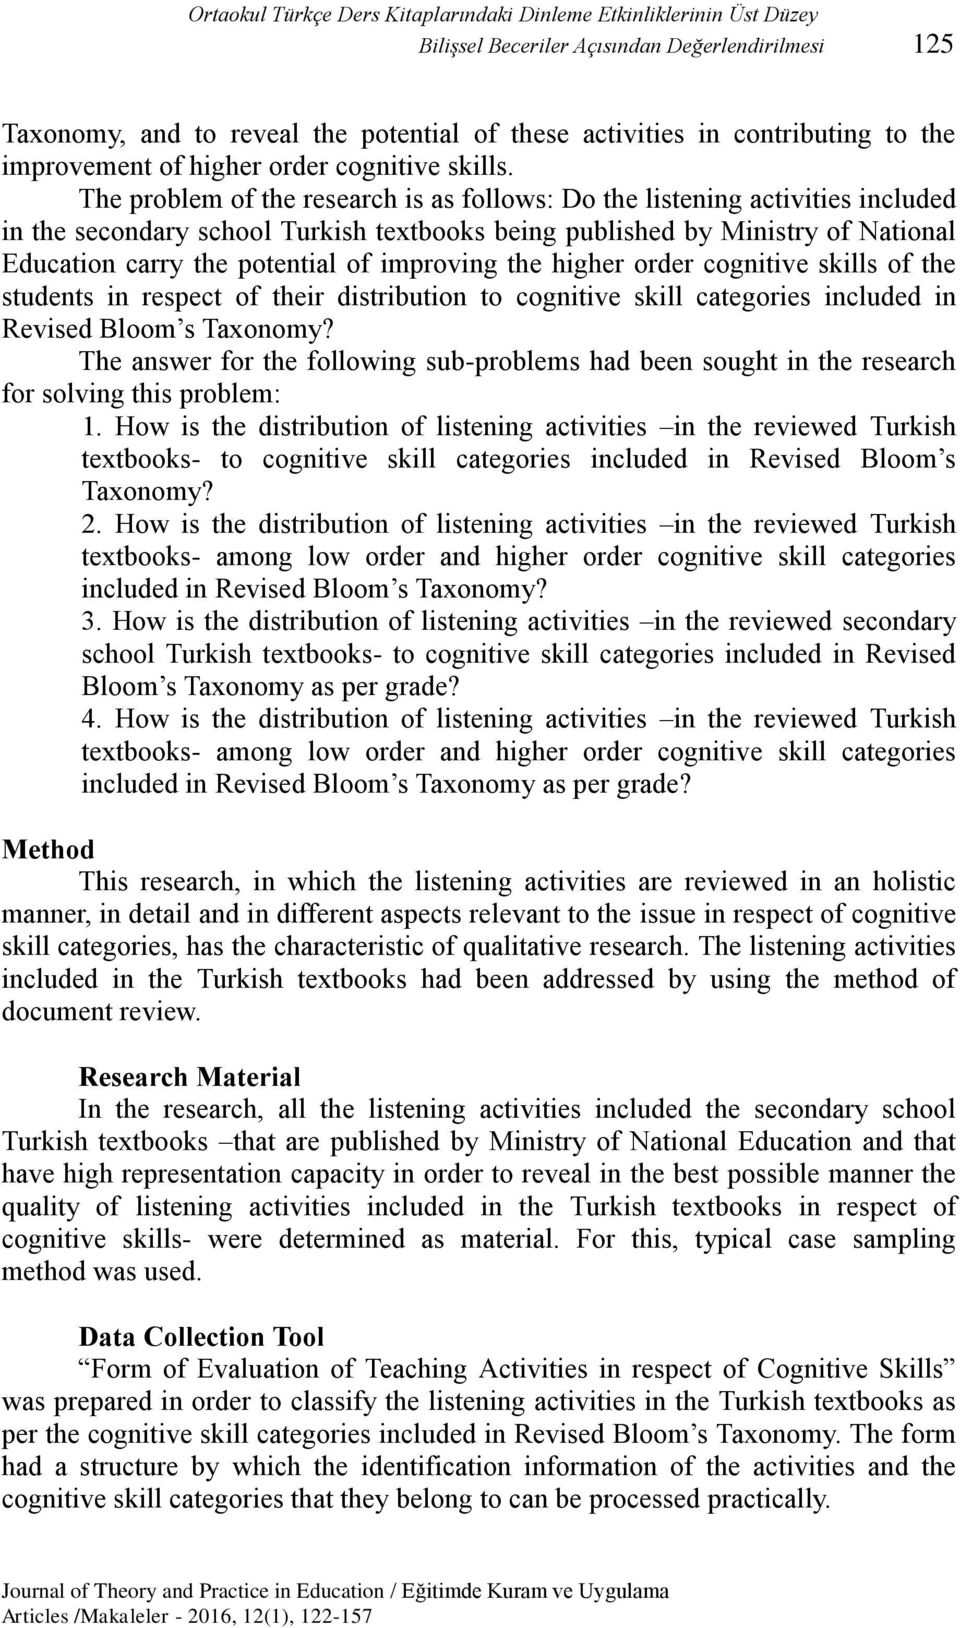 The problem of the research is as follows: Do the listening activities included in the secondary school Turkish textbooks being published by Ministry of National Education carry the potential of